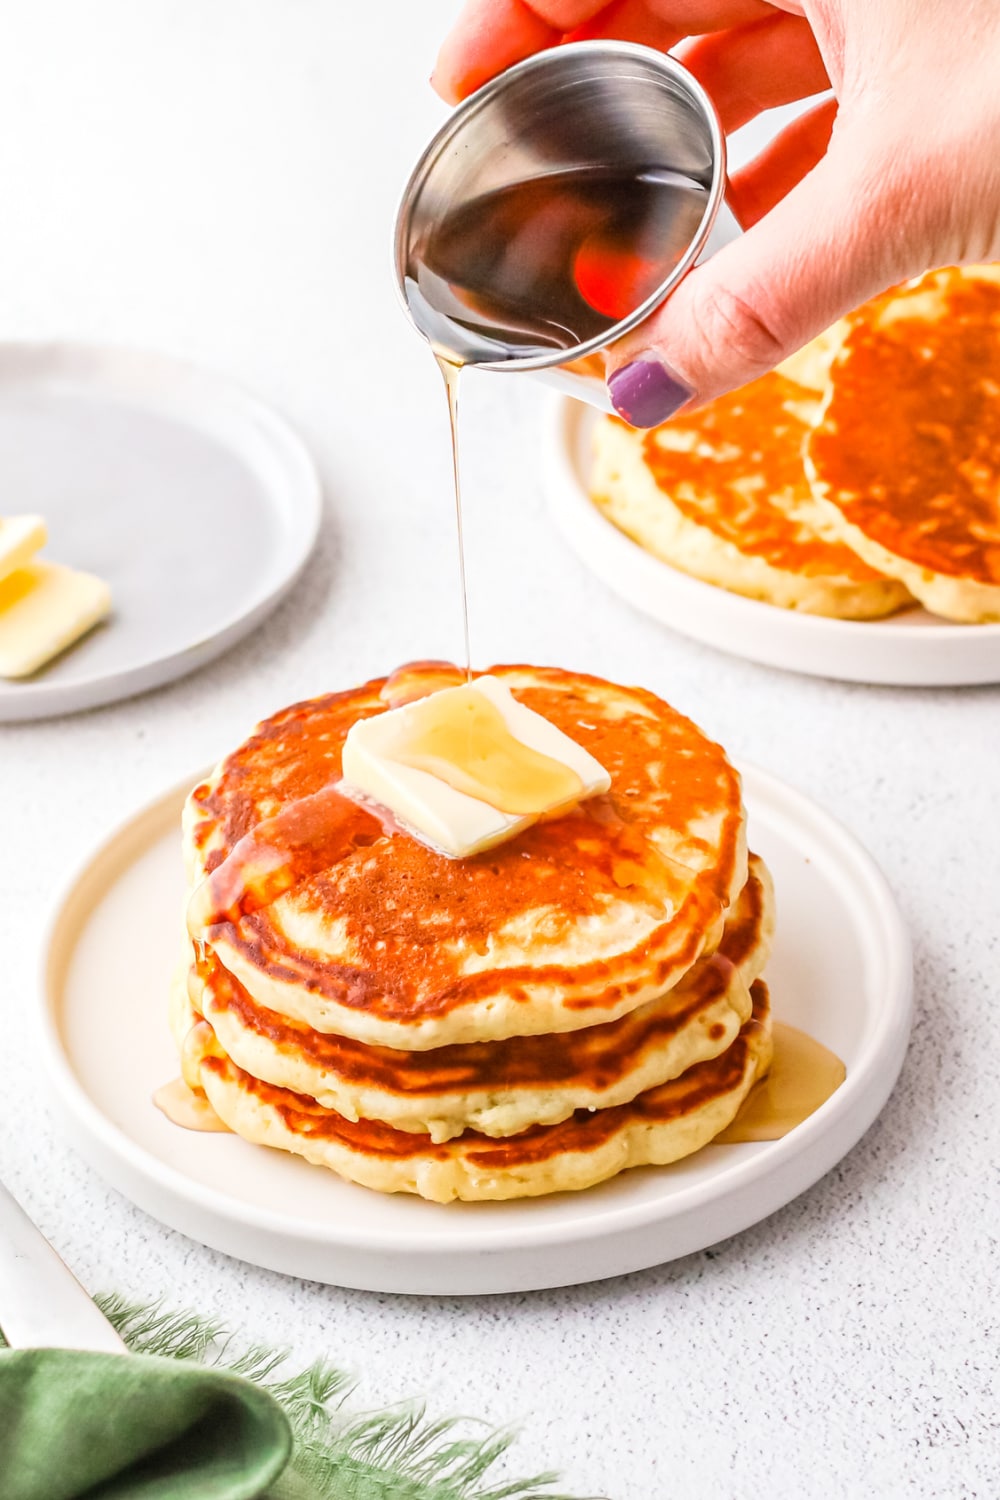 A small stack of pancakes topped with butter and syrup being poured over the top by a woman's hand.